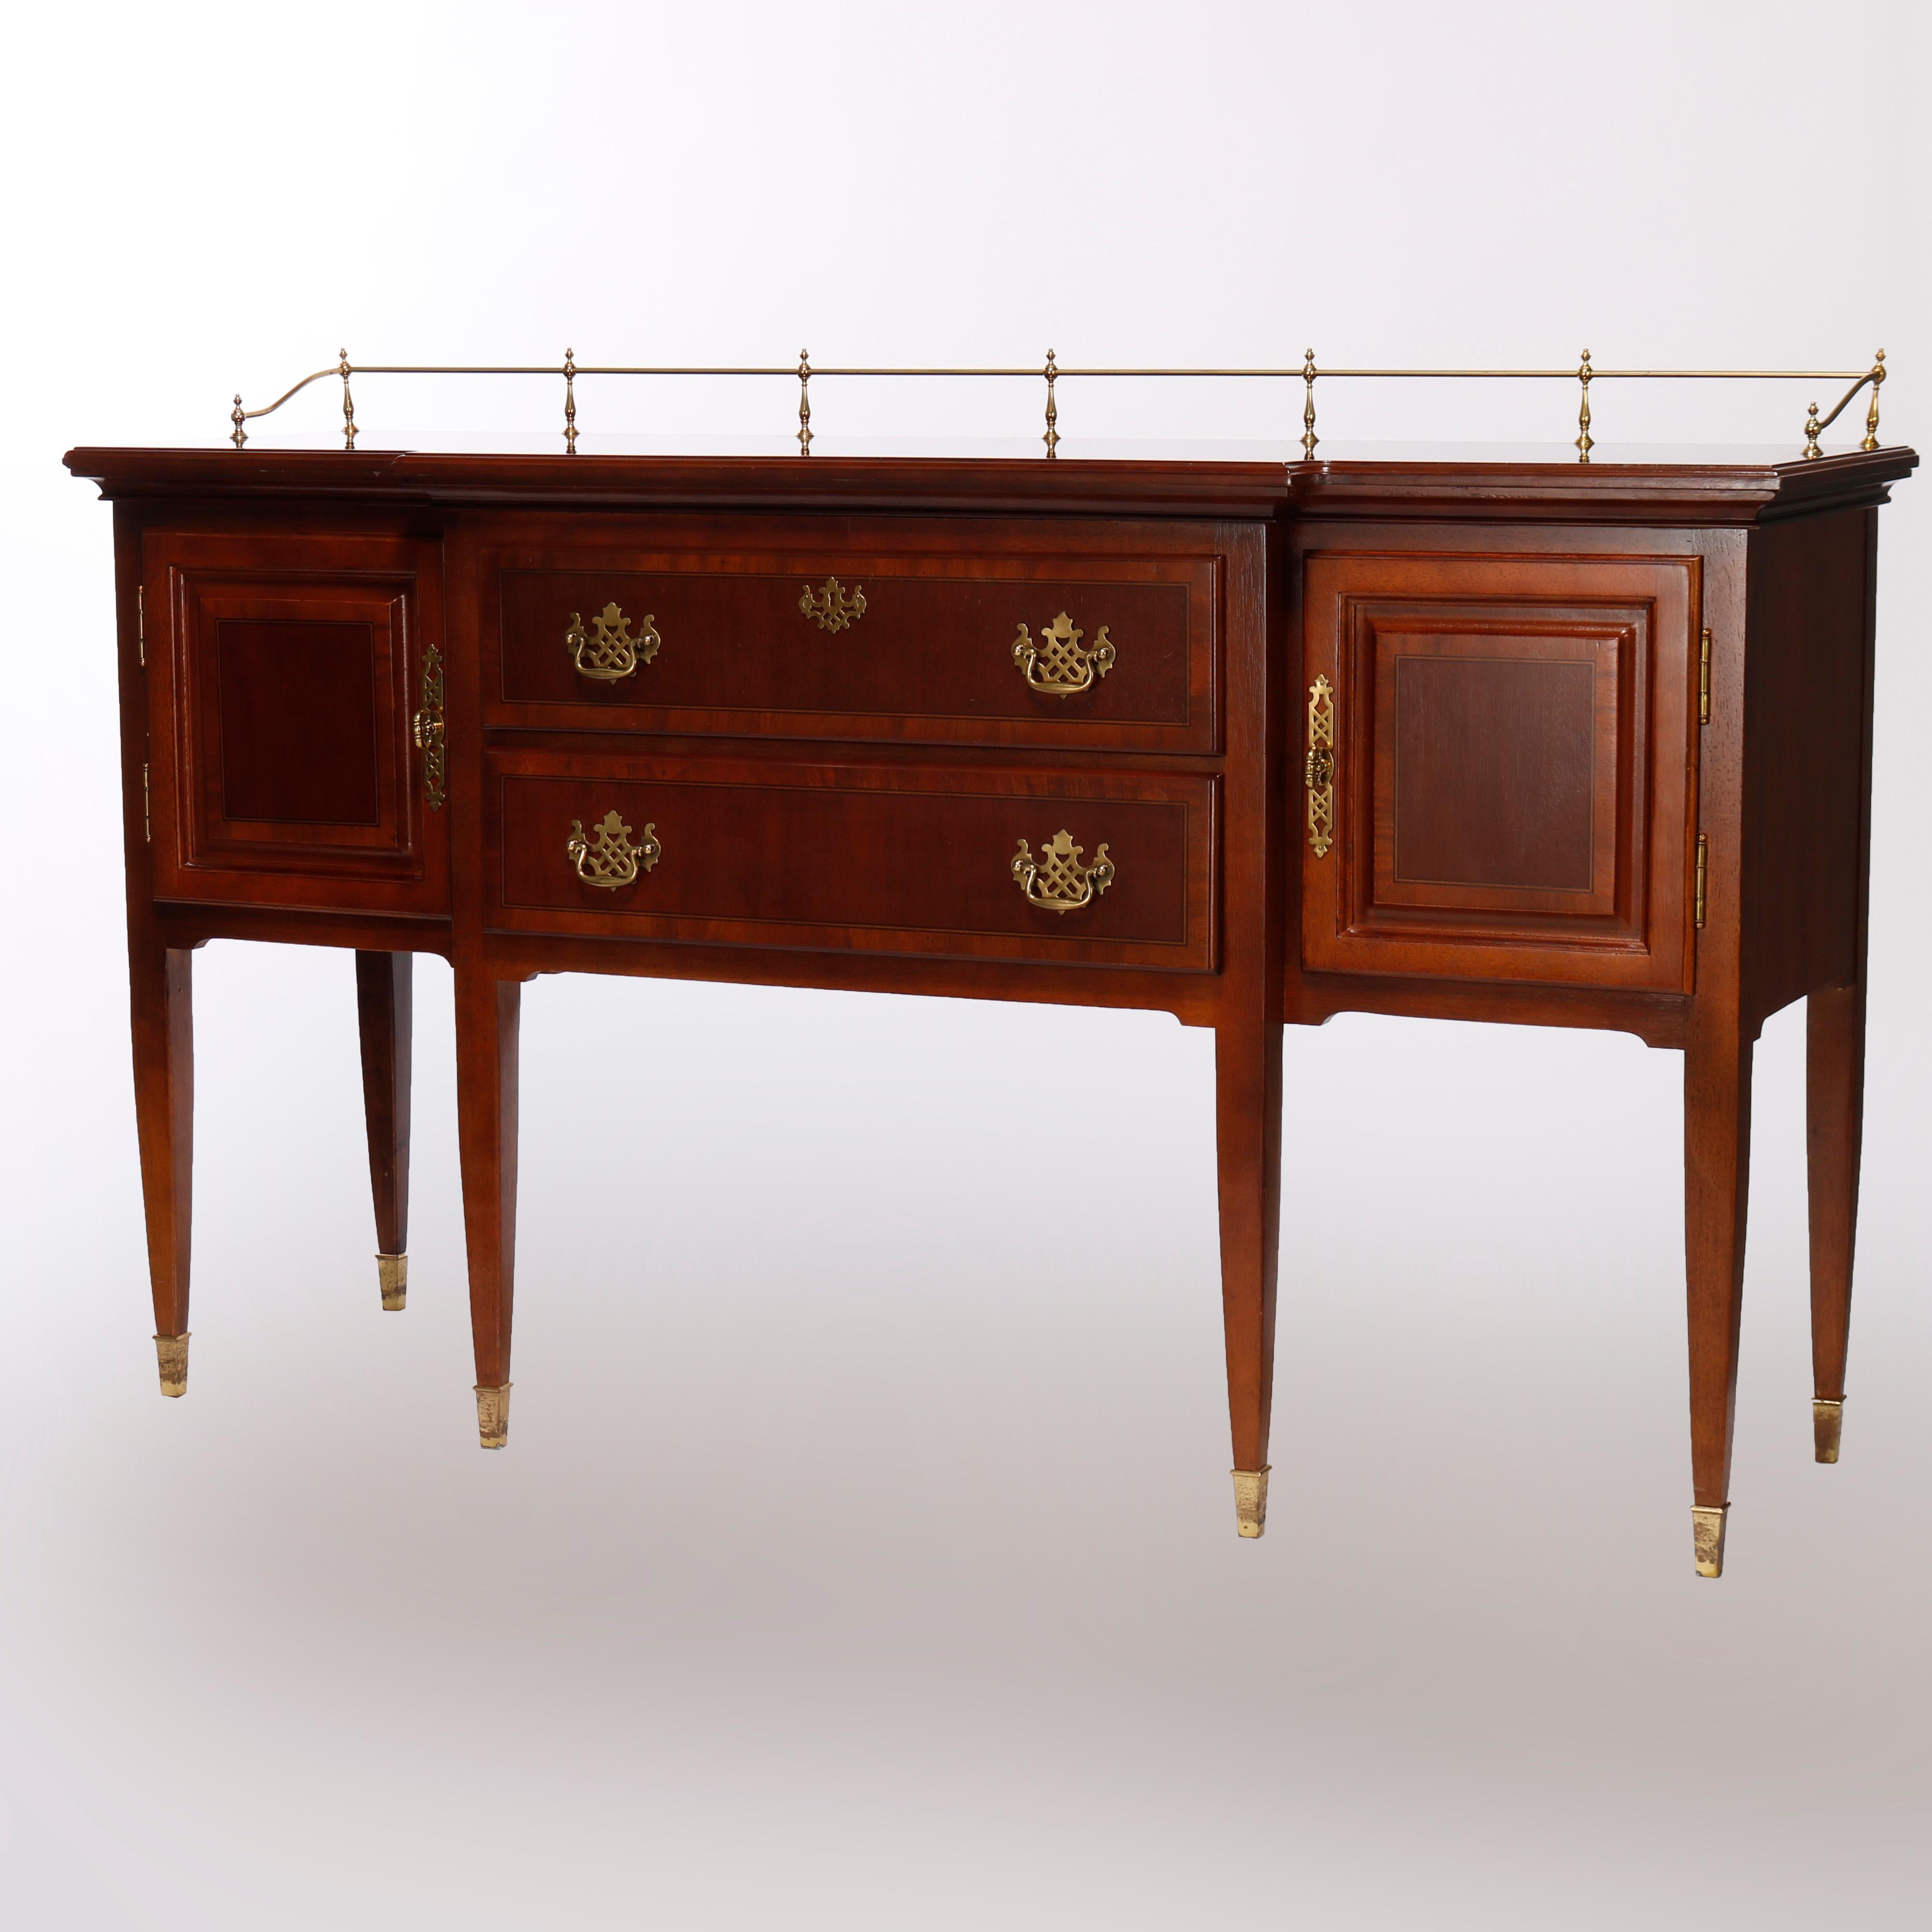 A Hepplewhite style sideboard offers mahogany construction with shaped top having brass rail over case with two crossbanded drawers with flanking cabinets having paneled doors, raised on tapered and straight legs, 20th century

Measures - 38.75''H